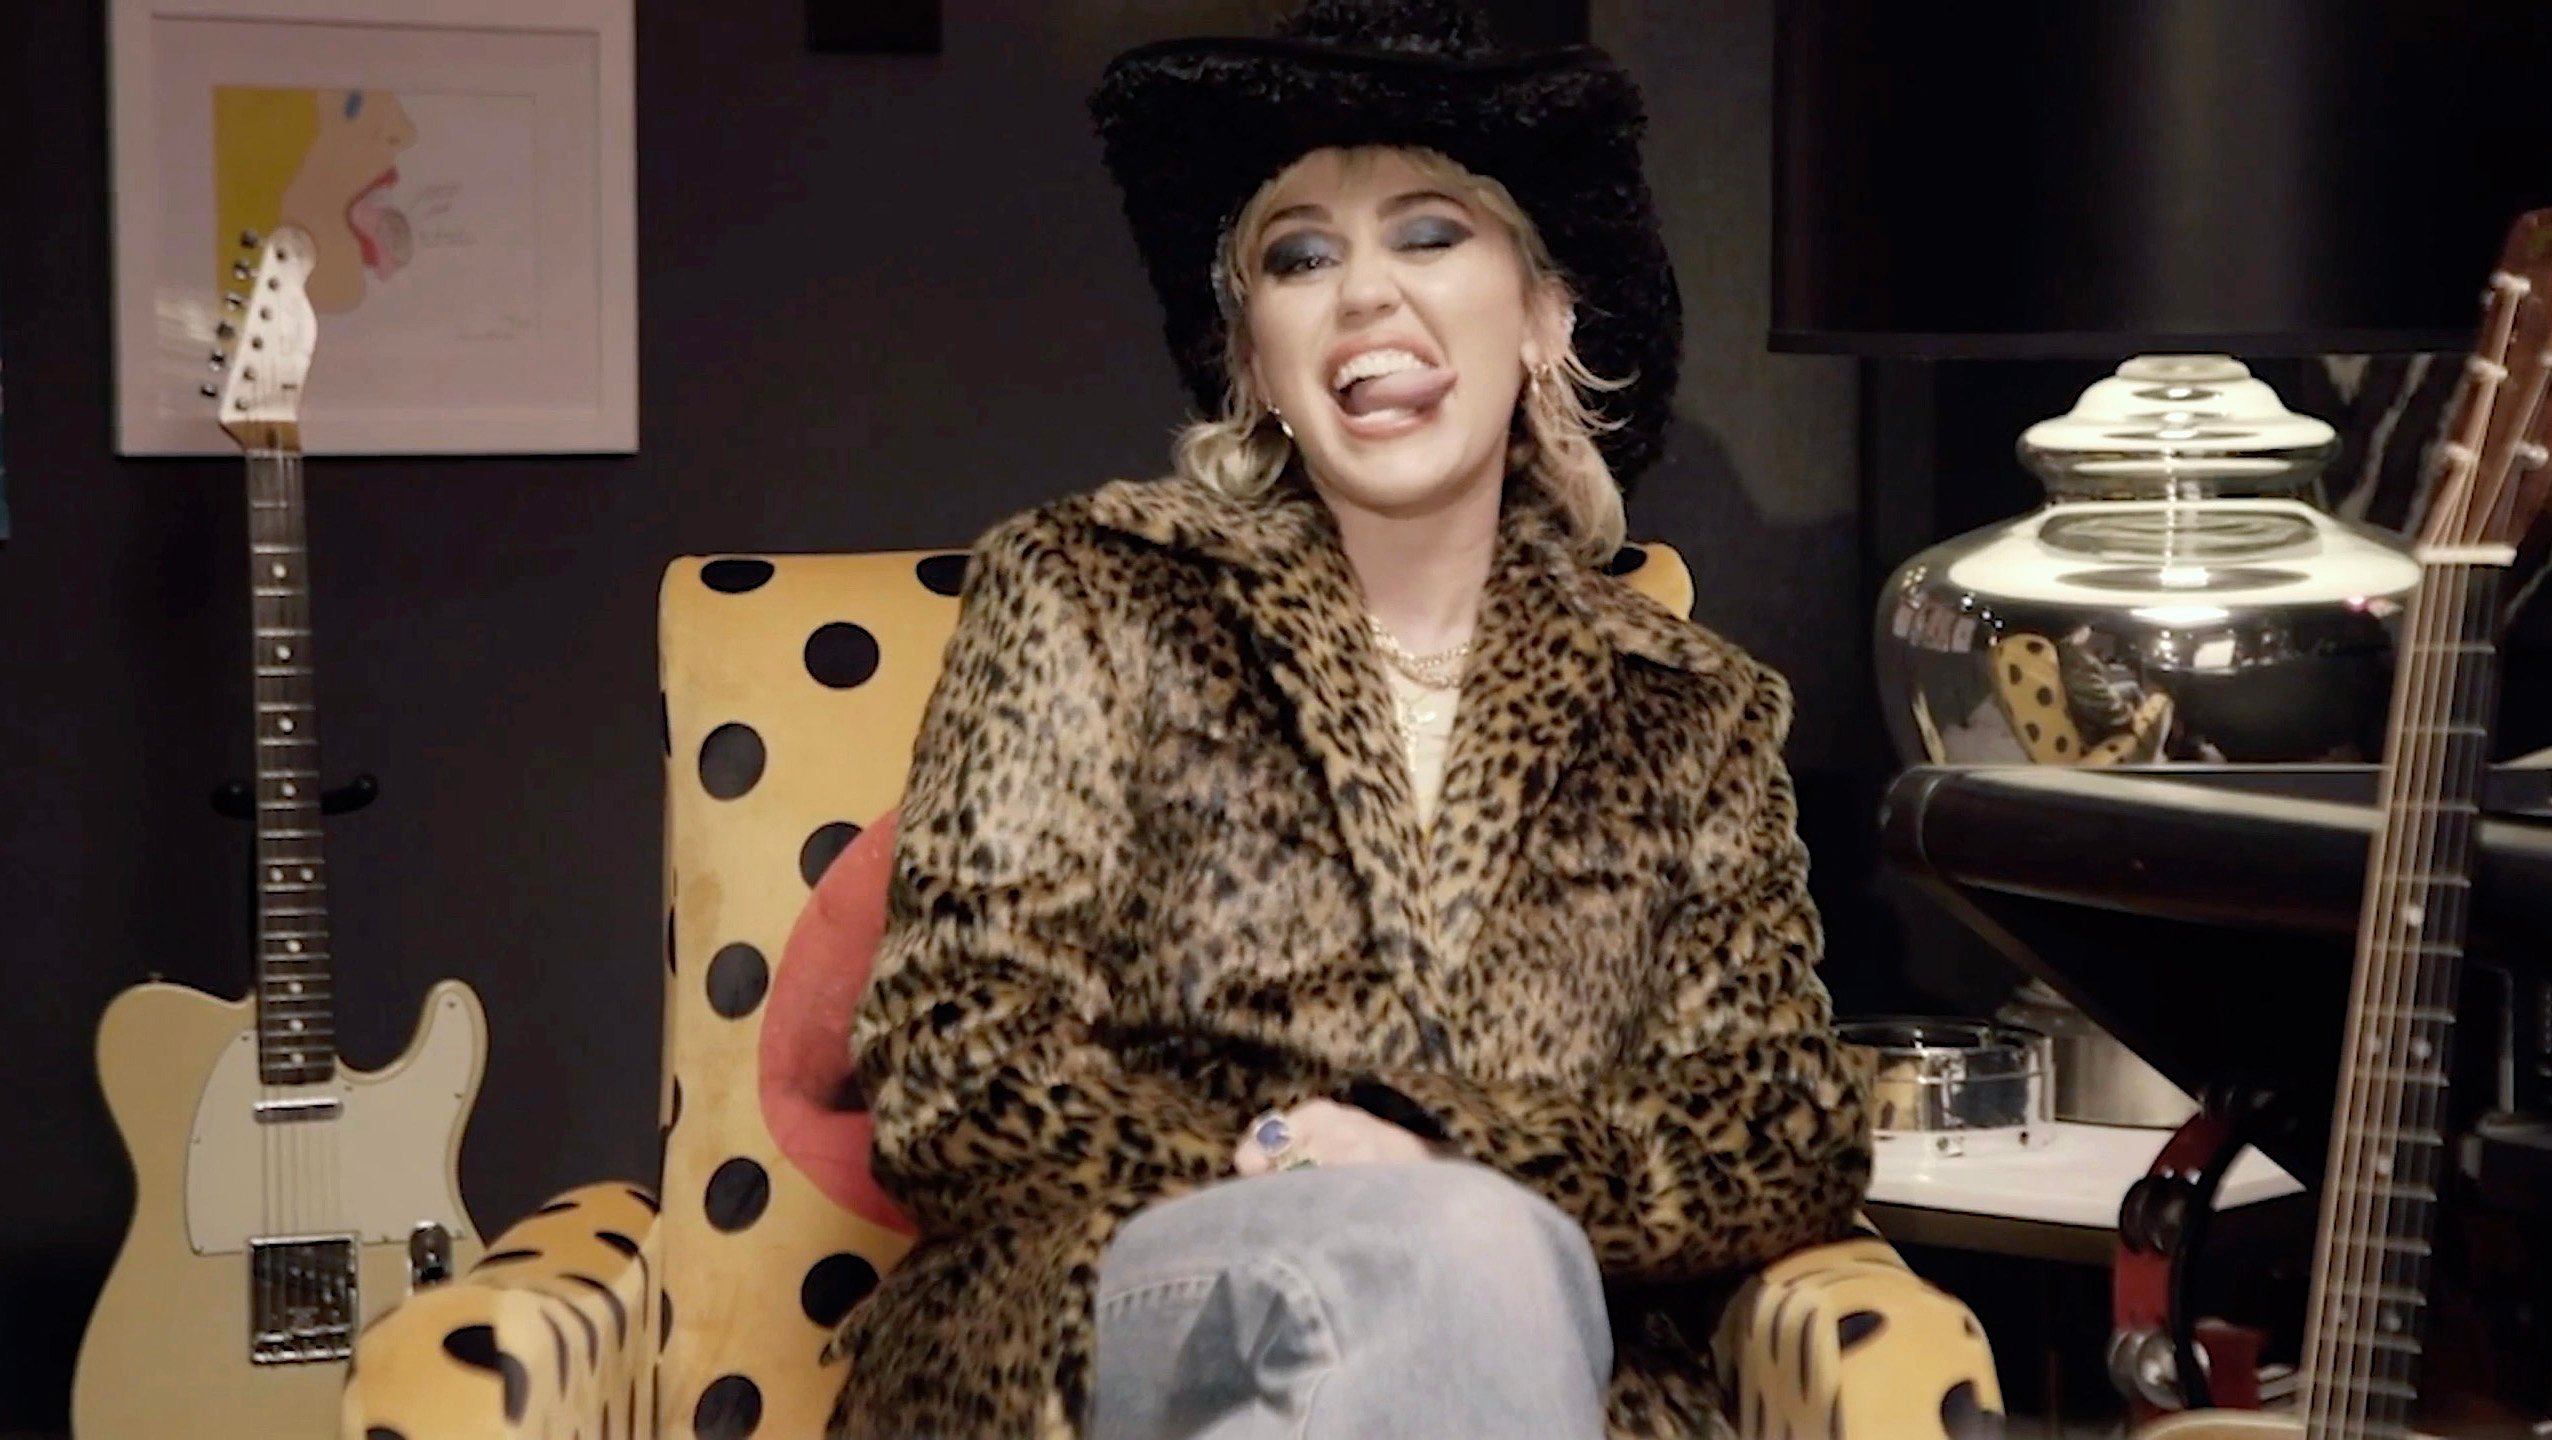 Miley Cyrus age 28 sticks her tongue out while wearing a fur coat and cowboy hat